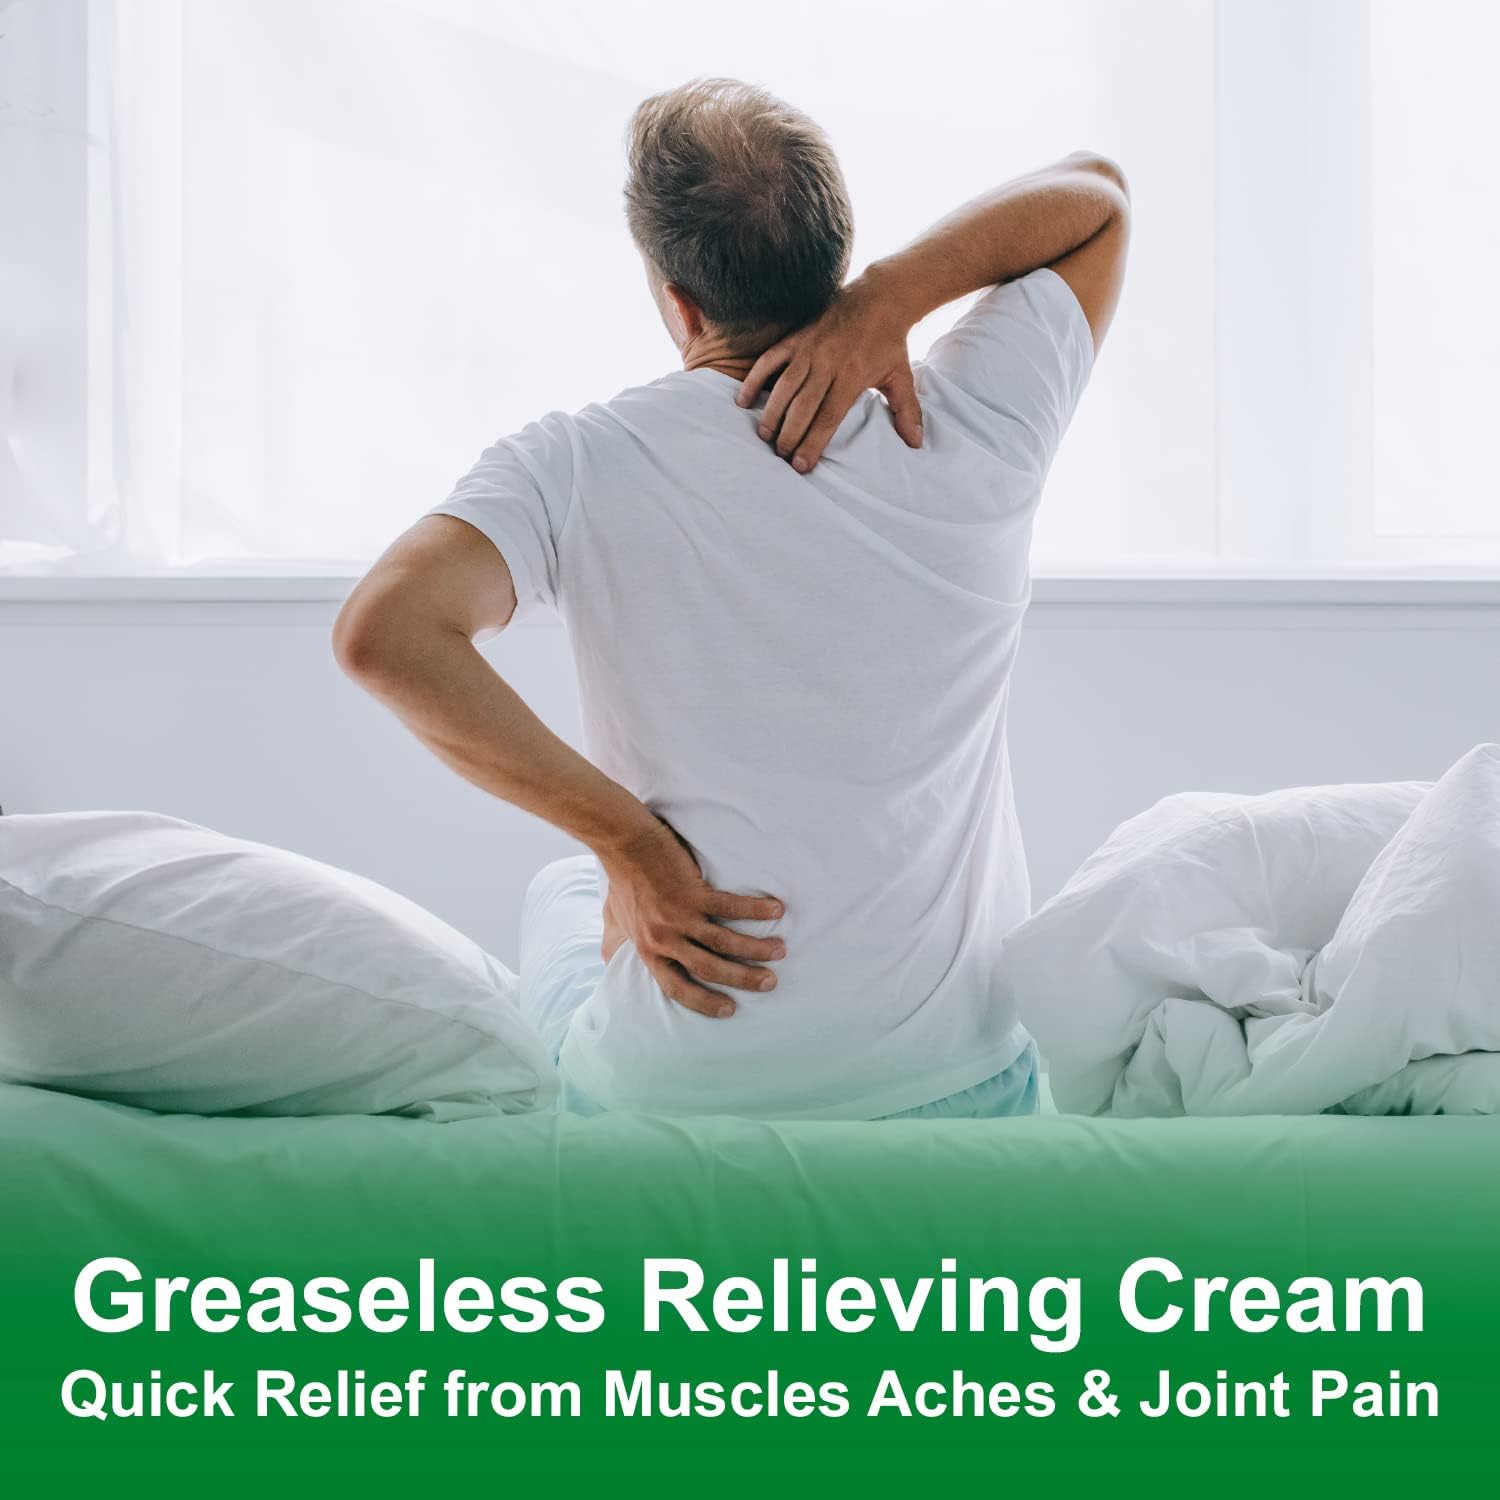 CareAll (3 Pack) 3.0 oz. Muscle Rub Non-Greasy Cream. Compare to The Active Ingredients of Greaseless Bengay, 10% Menthol & 15% Methyl Salicylate : Health & Household